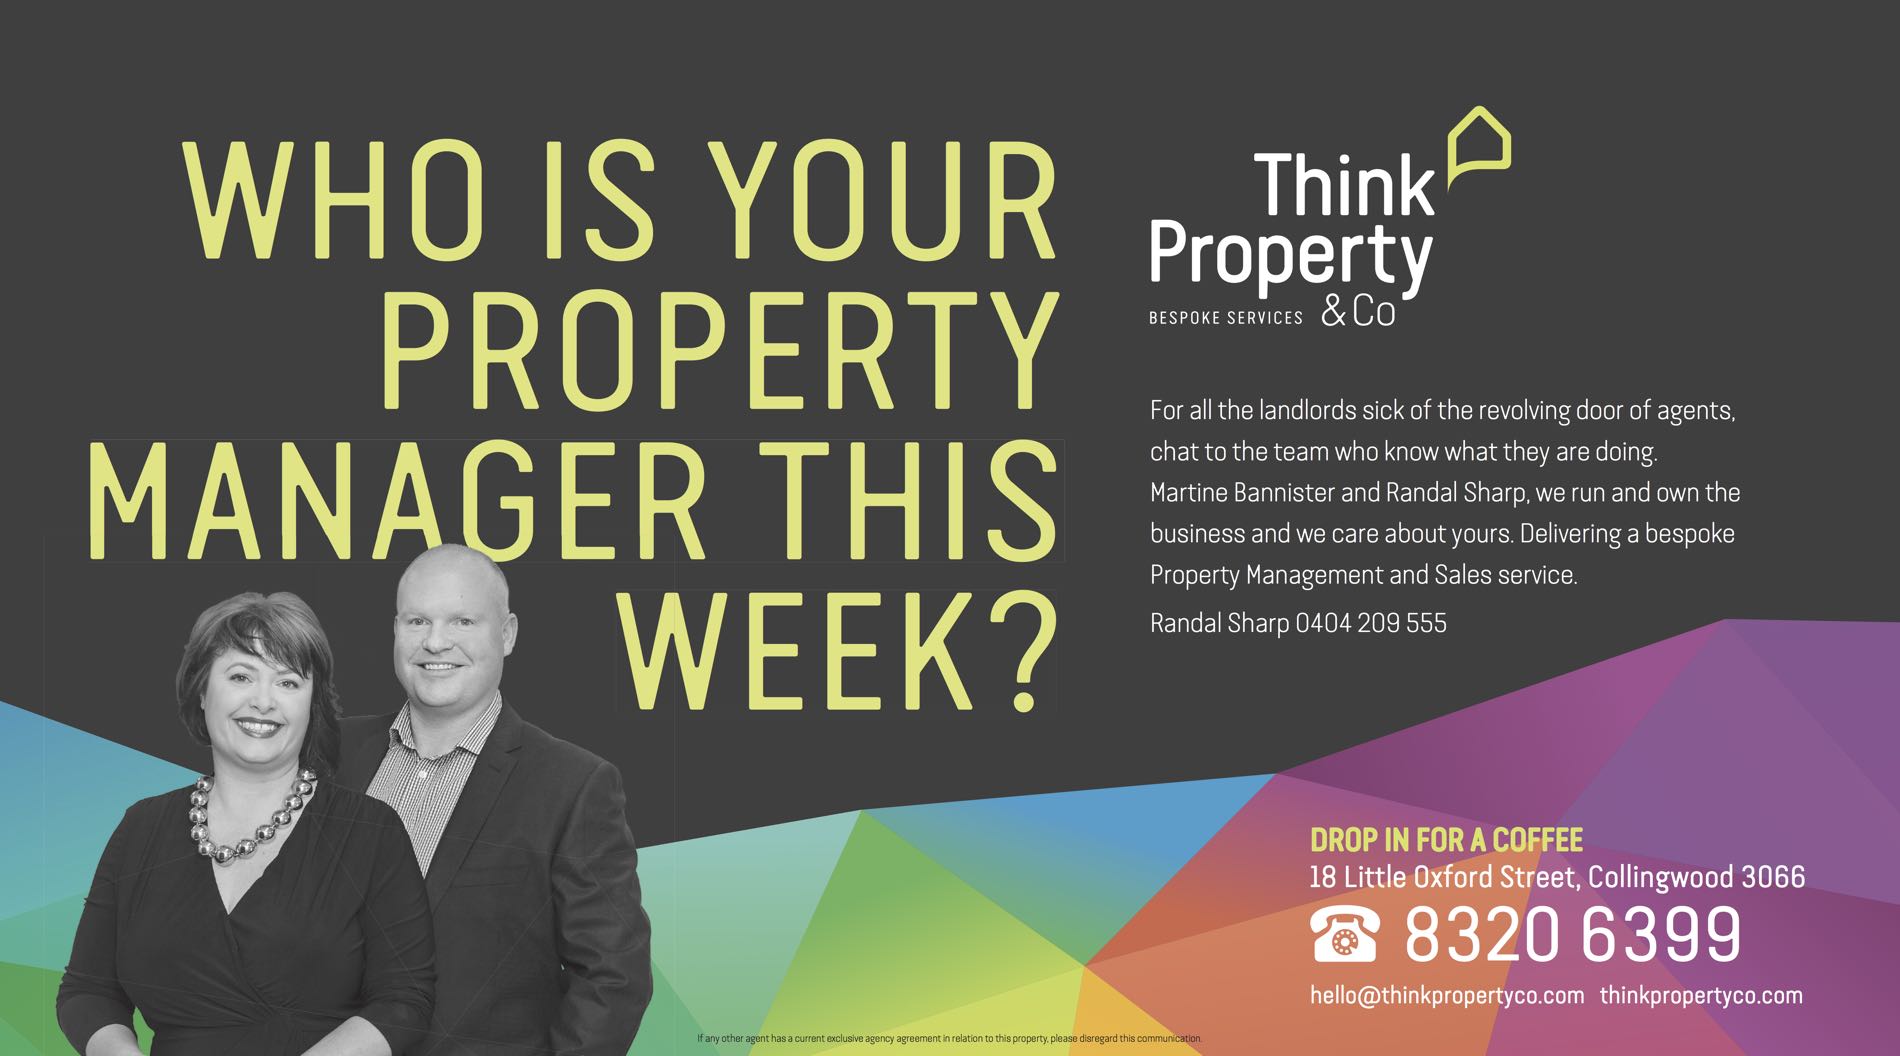 Who is your property manager this week?